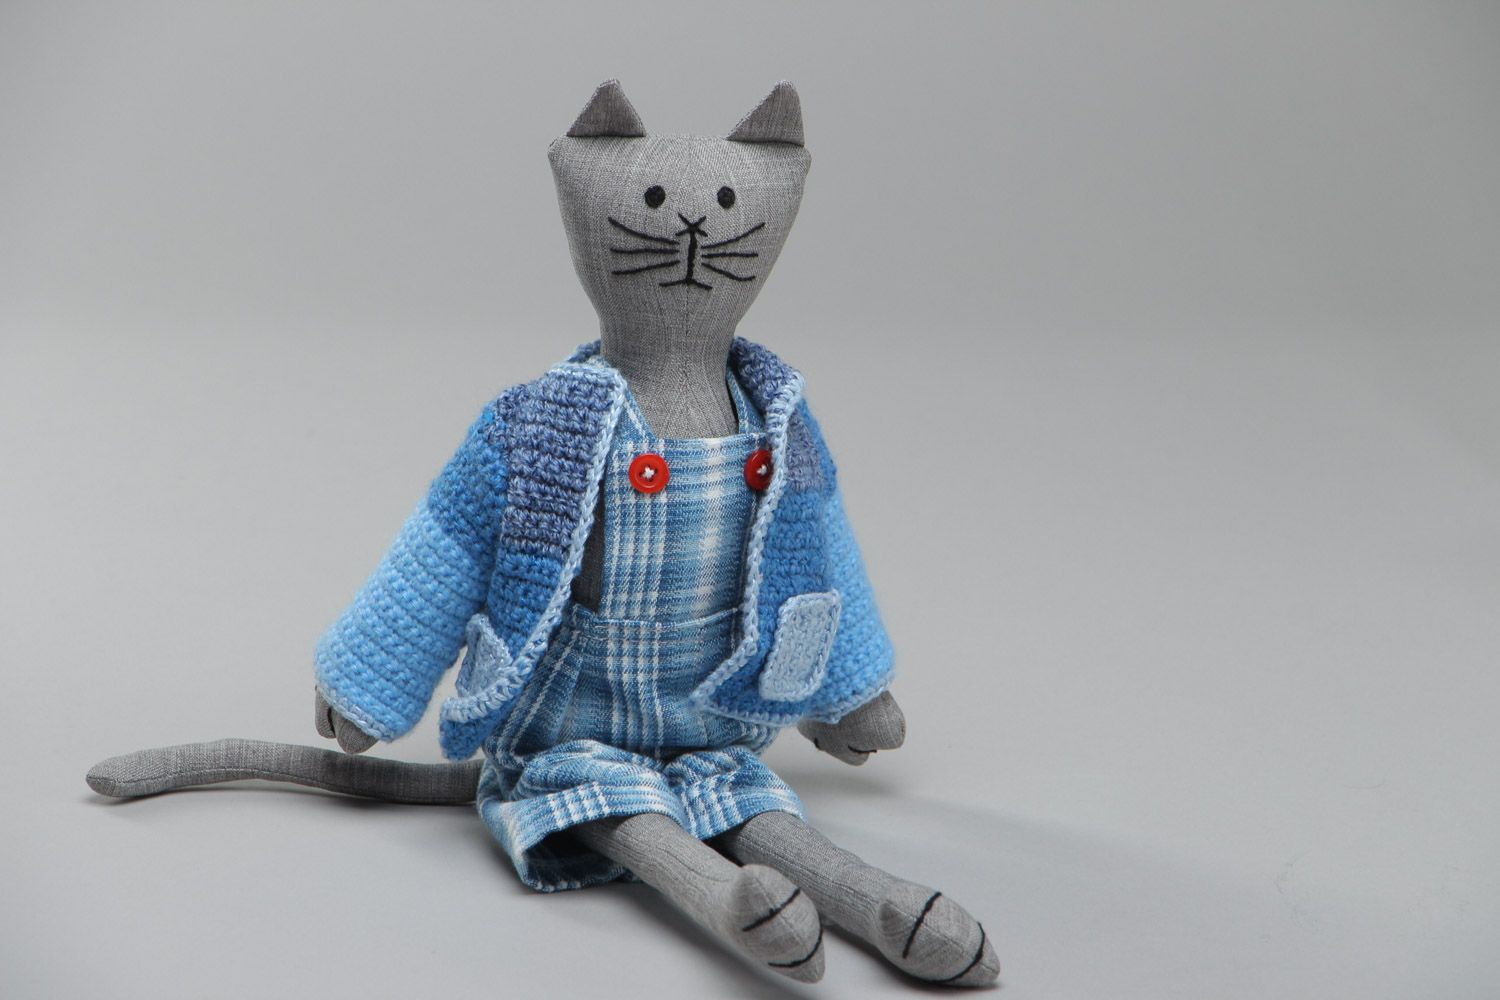 Handmade soft toy sewn of cotton cute gray cat in crocheted blue jacket photo 2